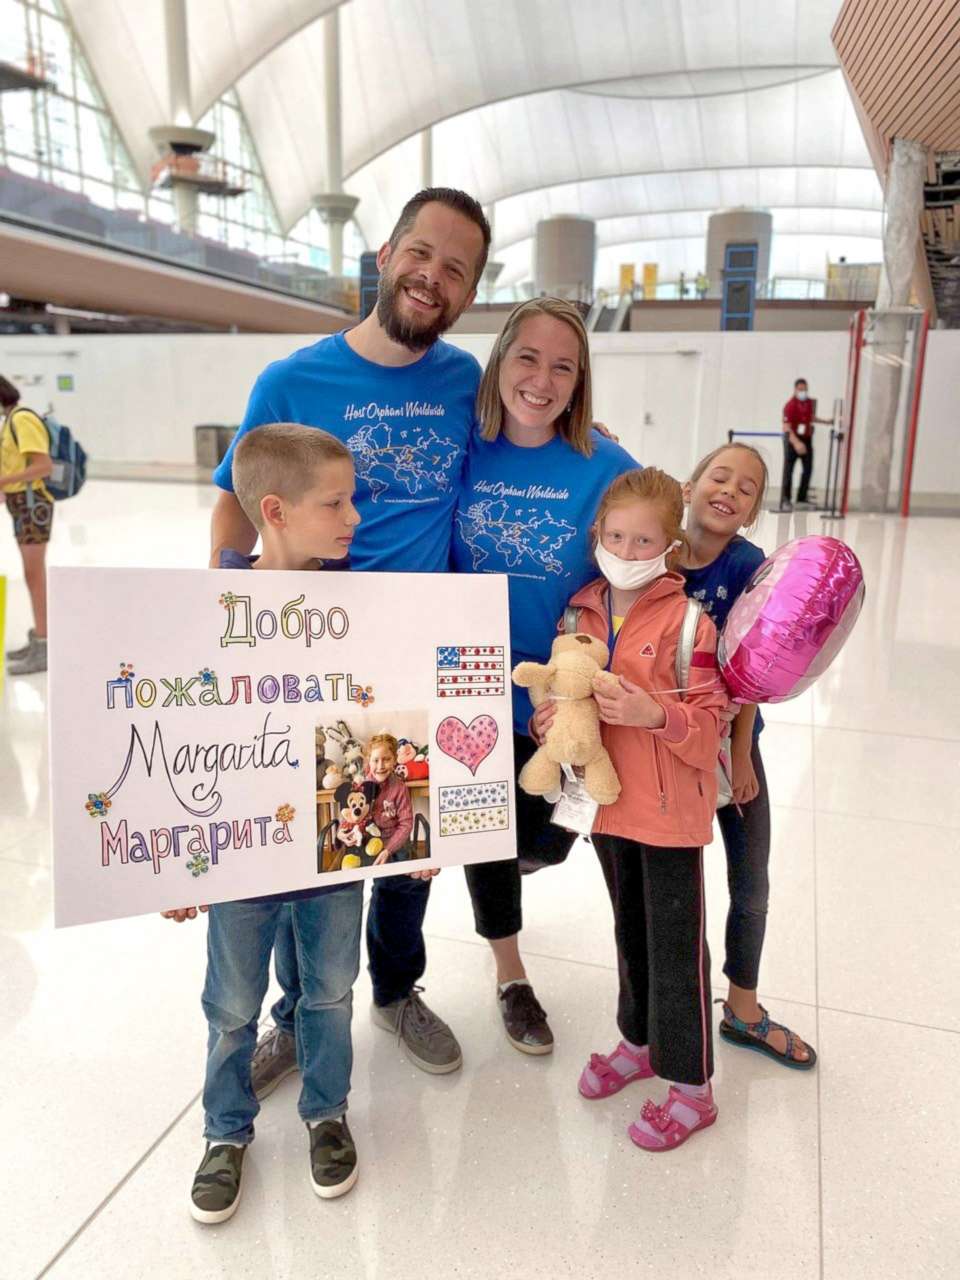 PHOTO: Matthew and Christy Johnson pose with two of their children and Margarita, an 8-year-old girl who lives in Ukraine.